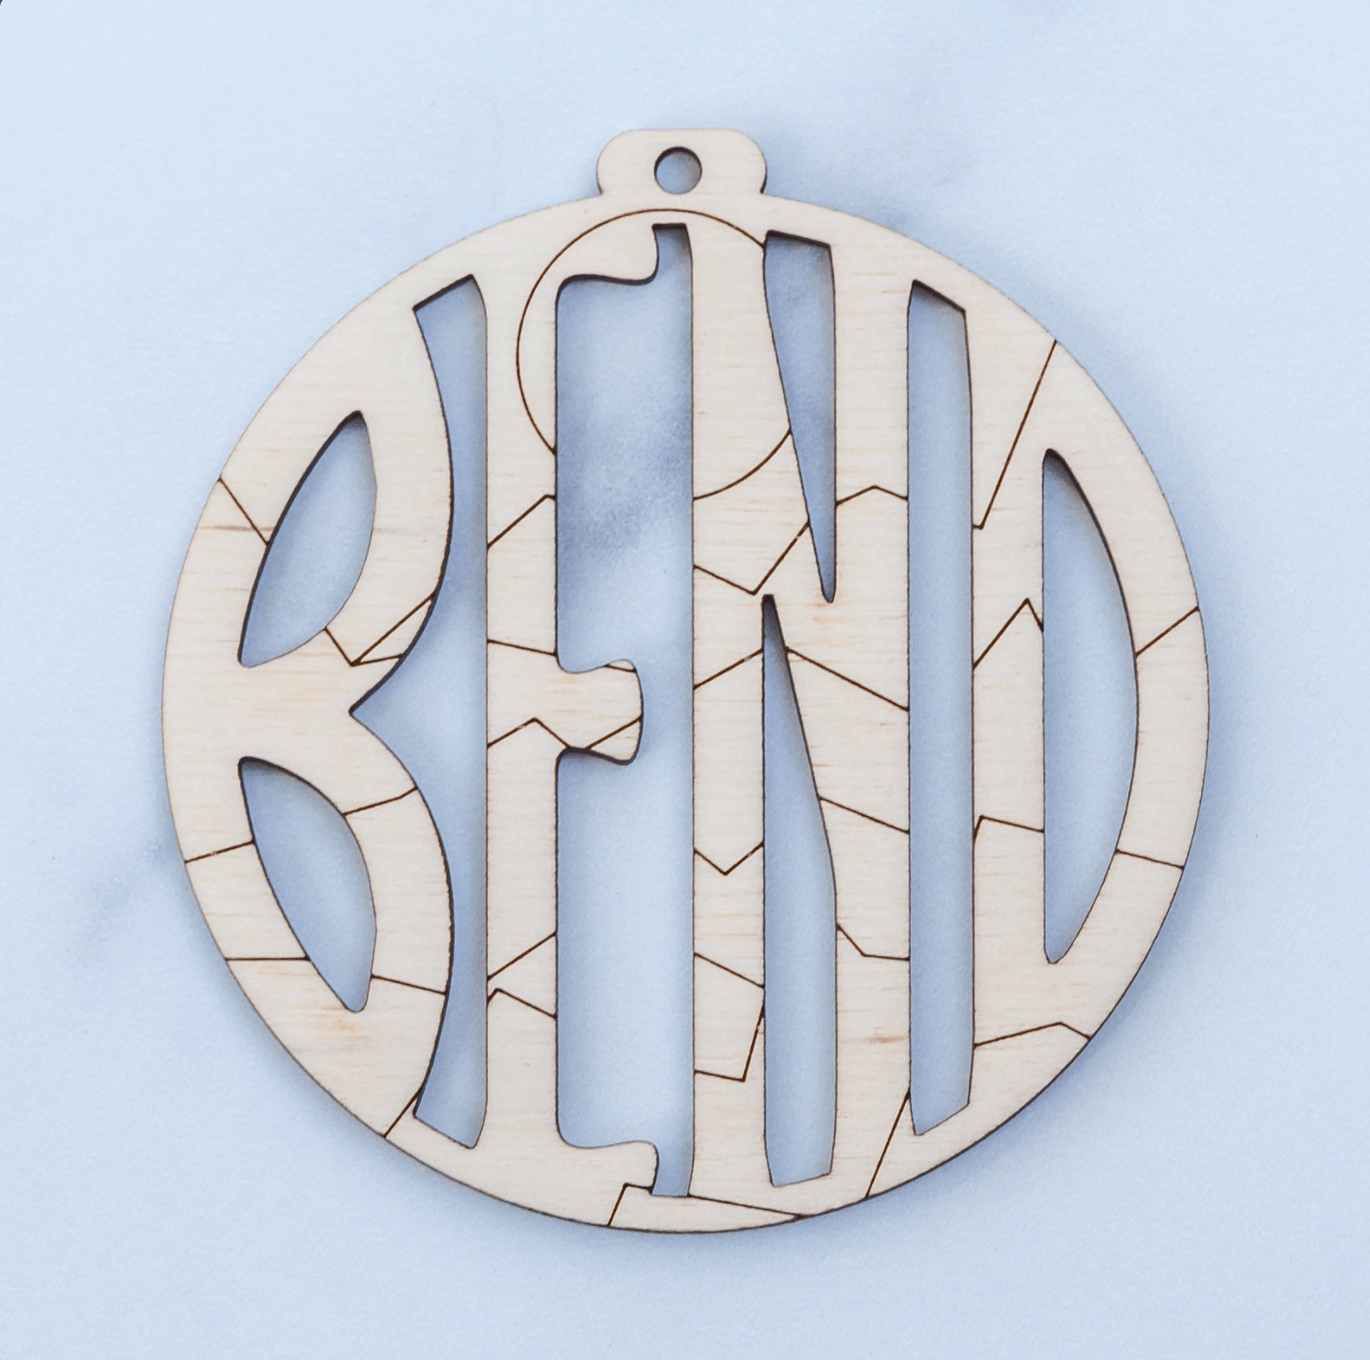 Wooden Ornament Paint Kits: Bend, Oregon Engraved and Laser Cut in Birch Plywood by LeeMo Designs in Bend, Oregon